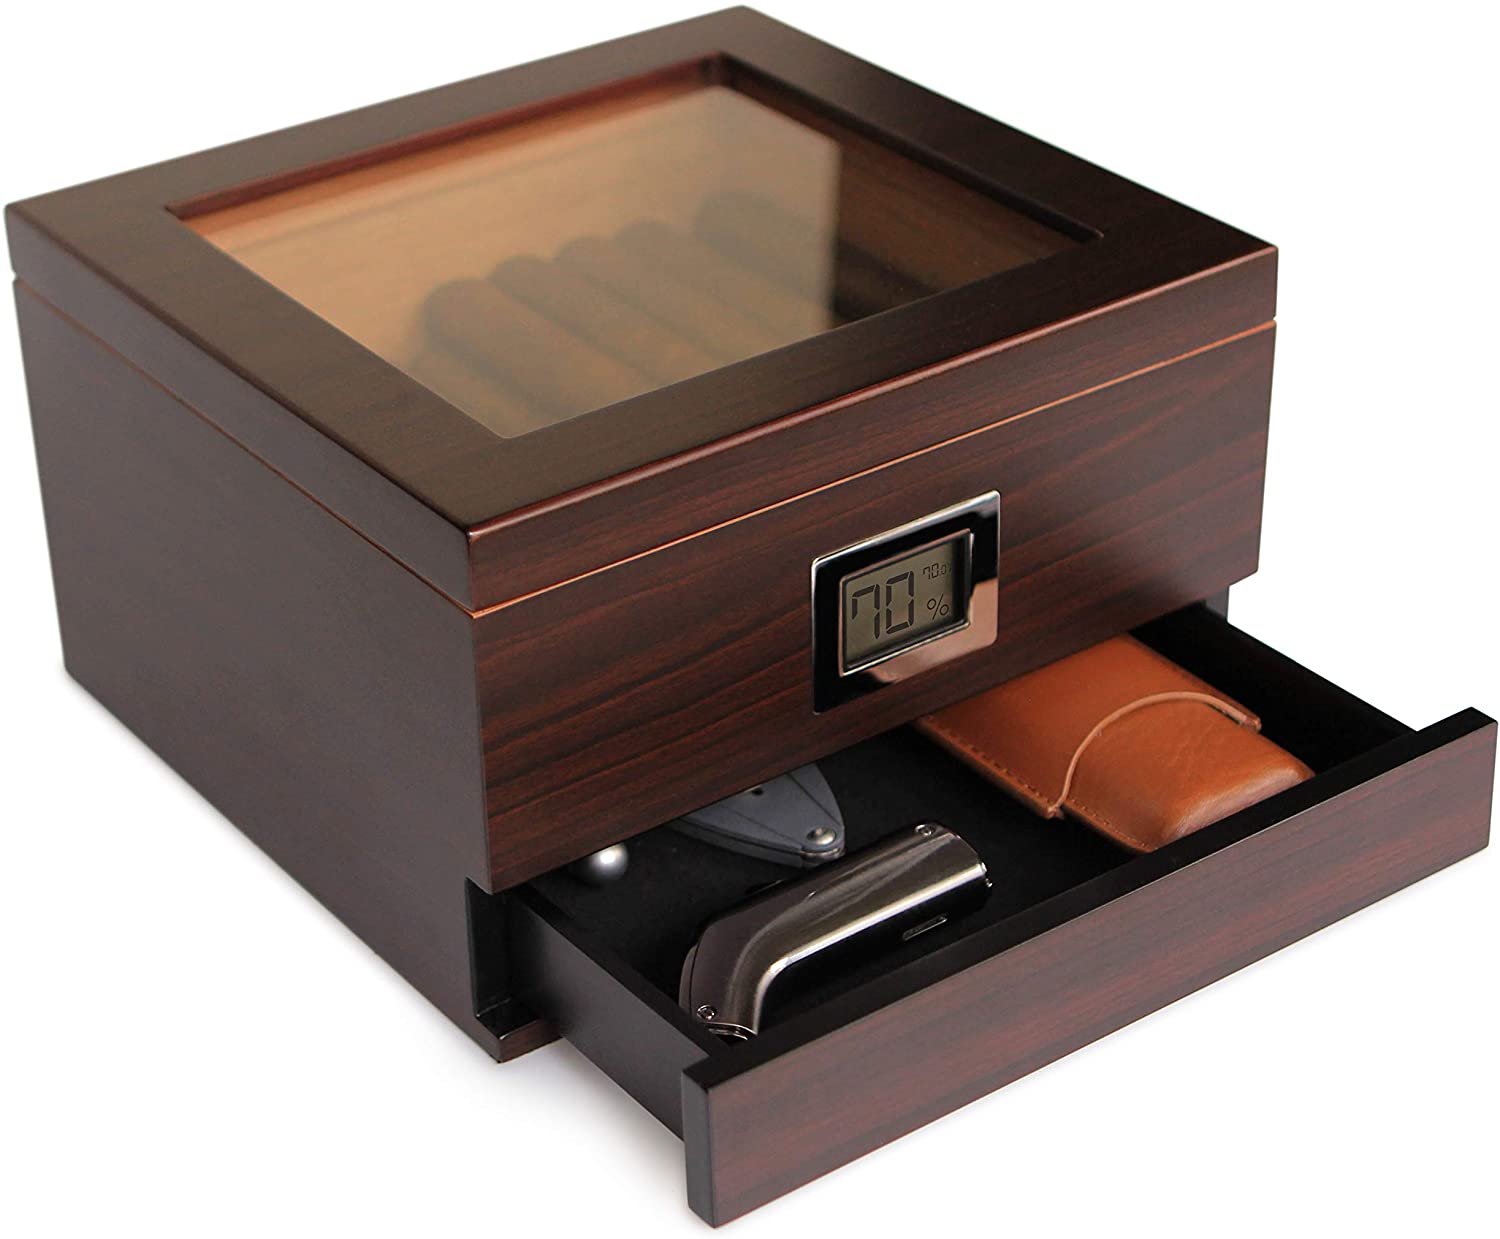 Case Elegance glass-topped humidor